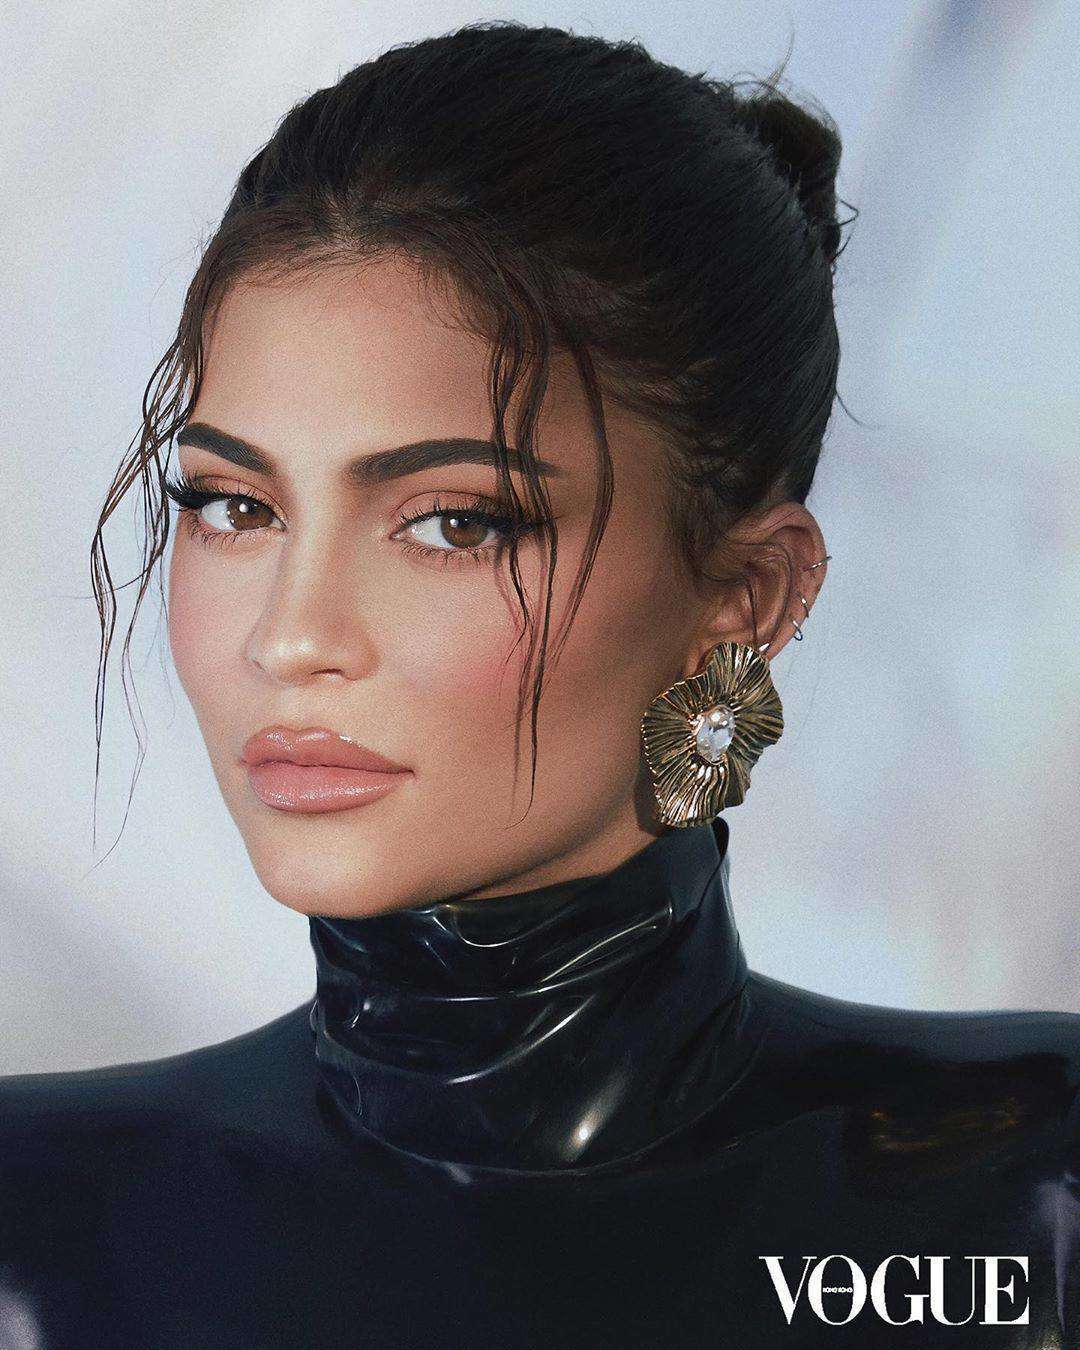 Photos n°2 : Kylie Jenner Airbrushed to Oblivion for Vogue!